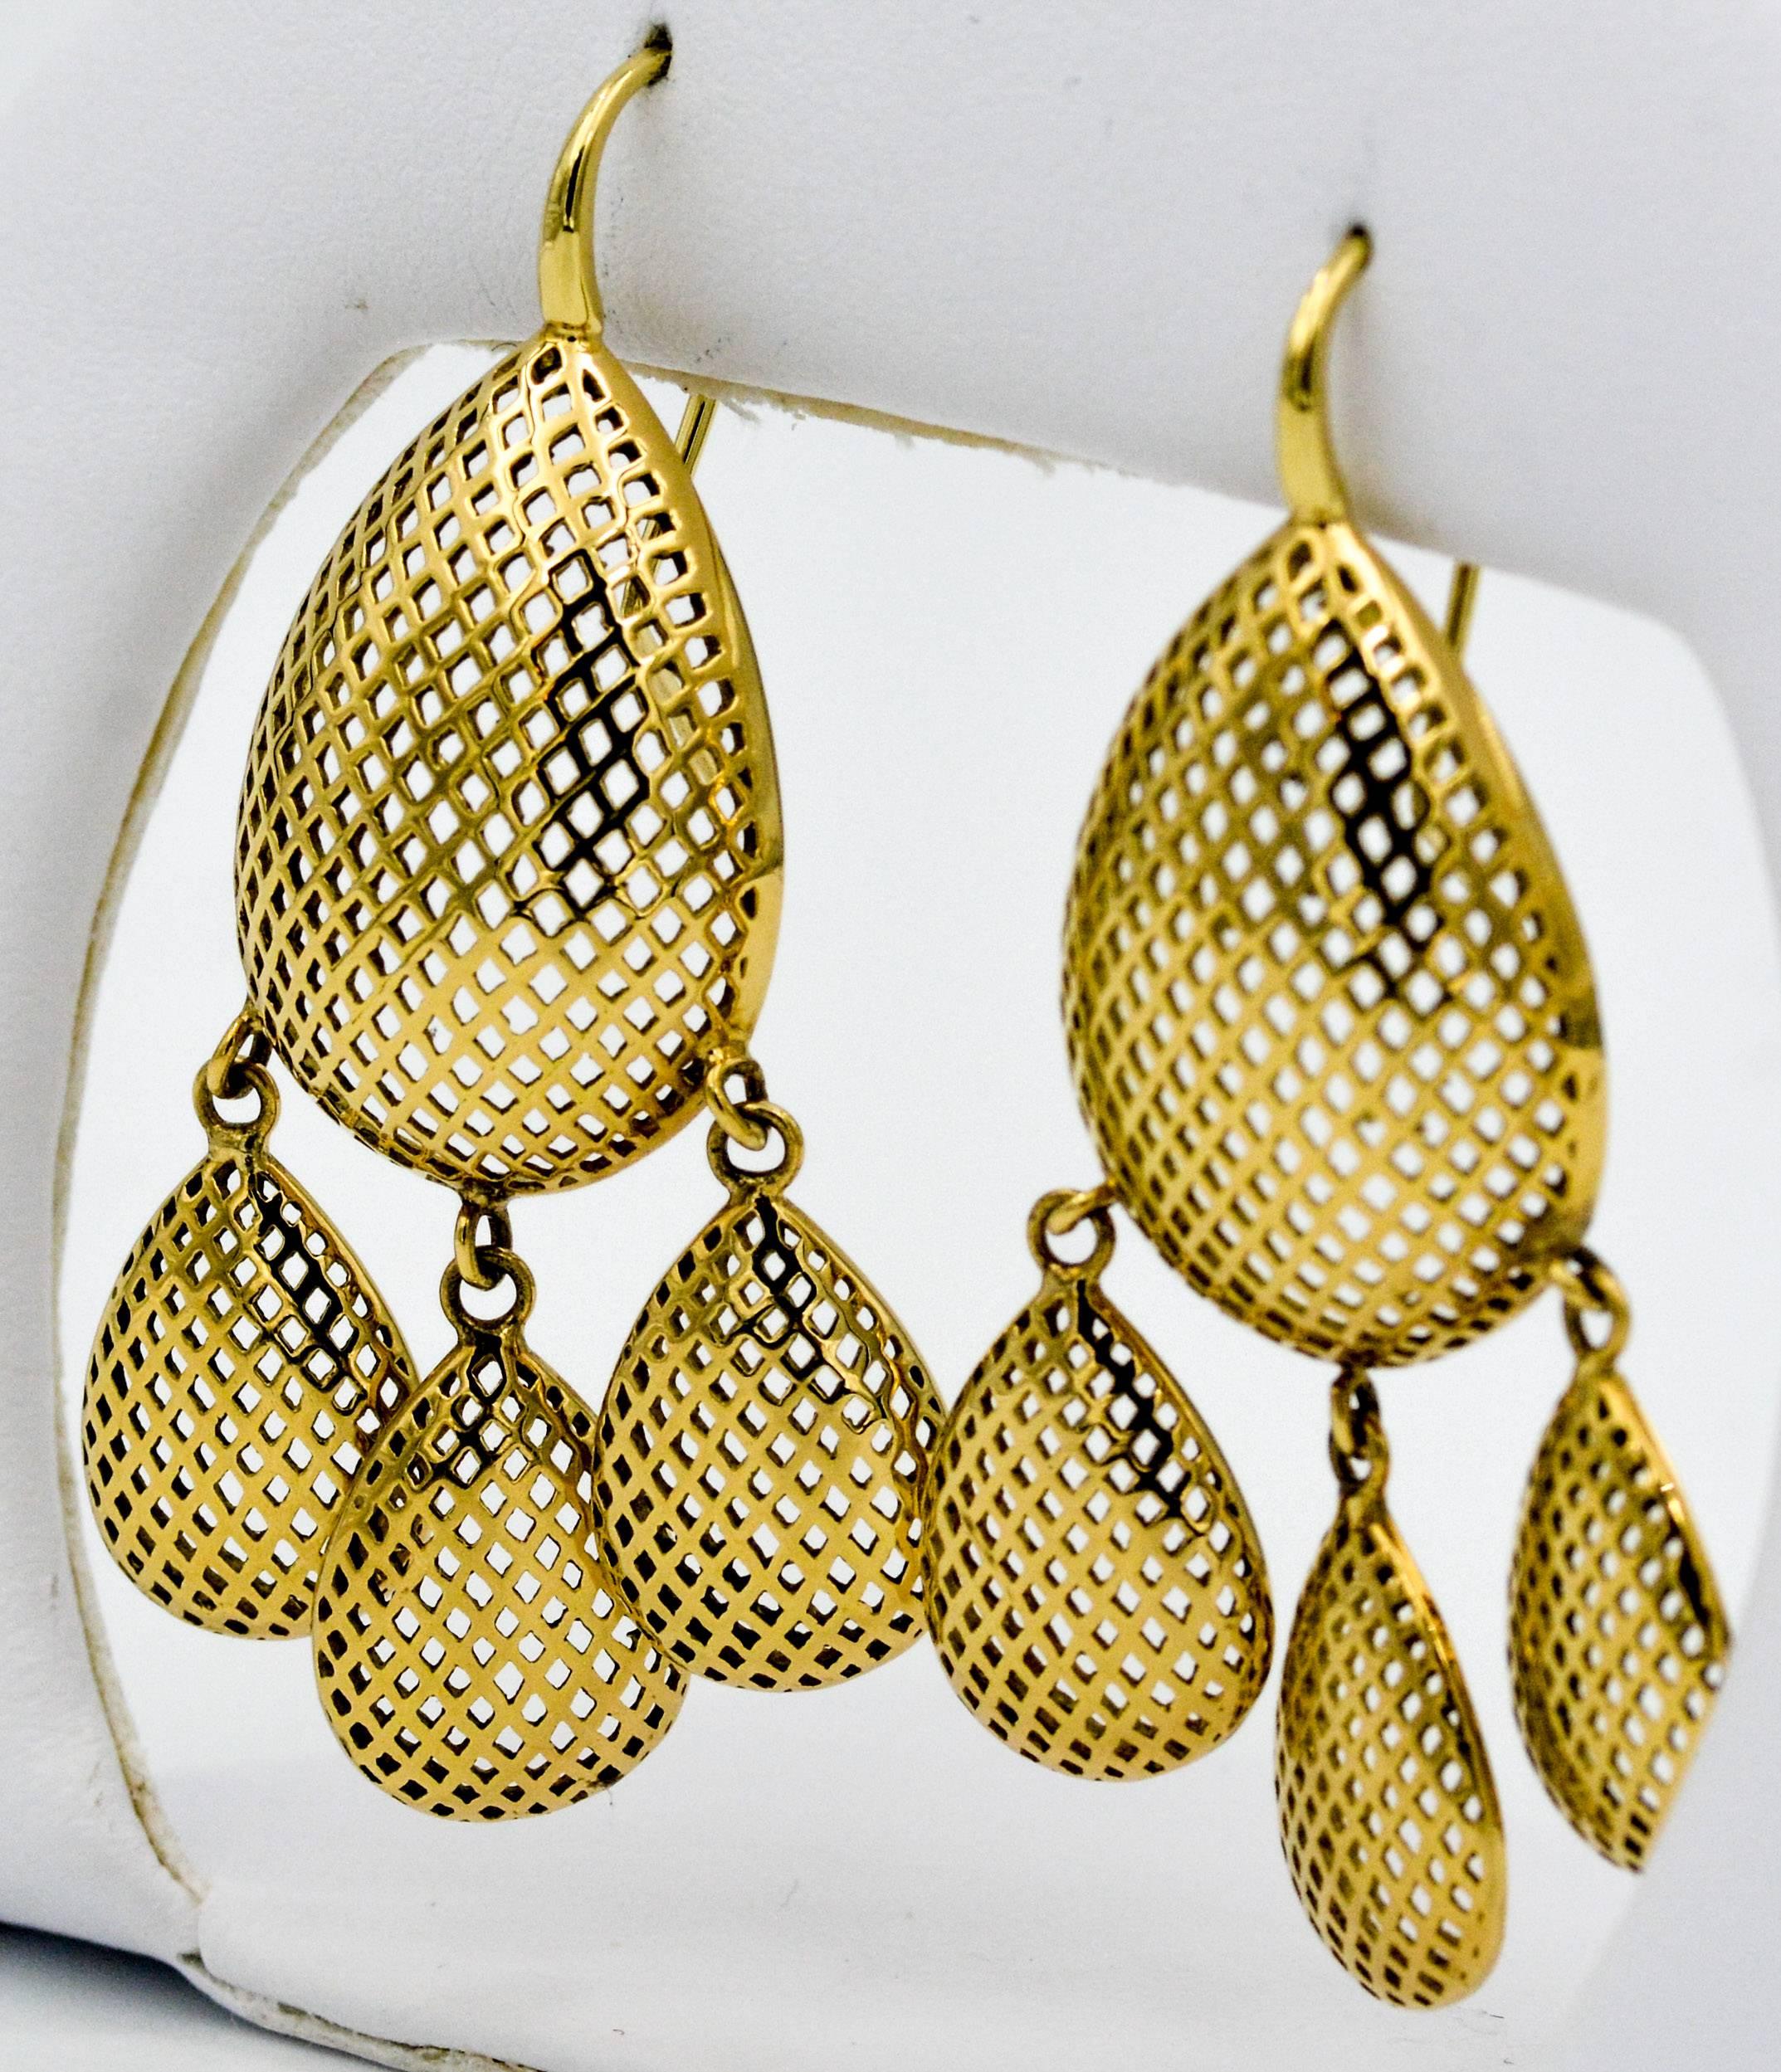 Release the artist within and capture all the attention in these classic Ray Griffith Chandelier earrings. Ray Griffin executed his signature style of artistic open work in these 18 karat yellow gold earrings. The 18 karat gold earrings are